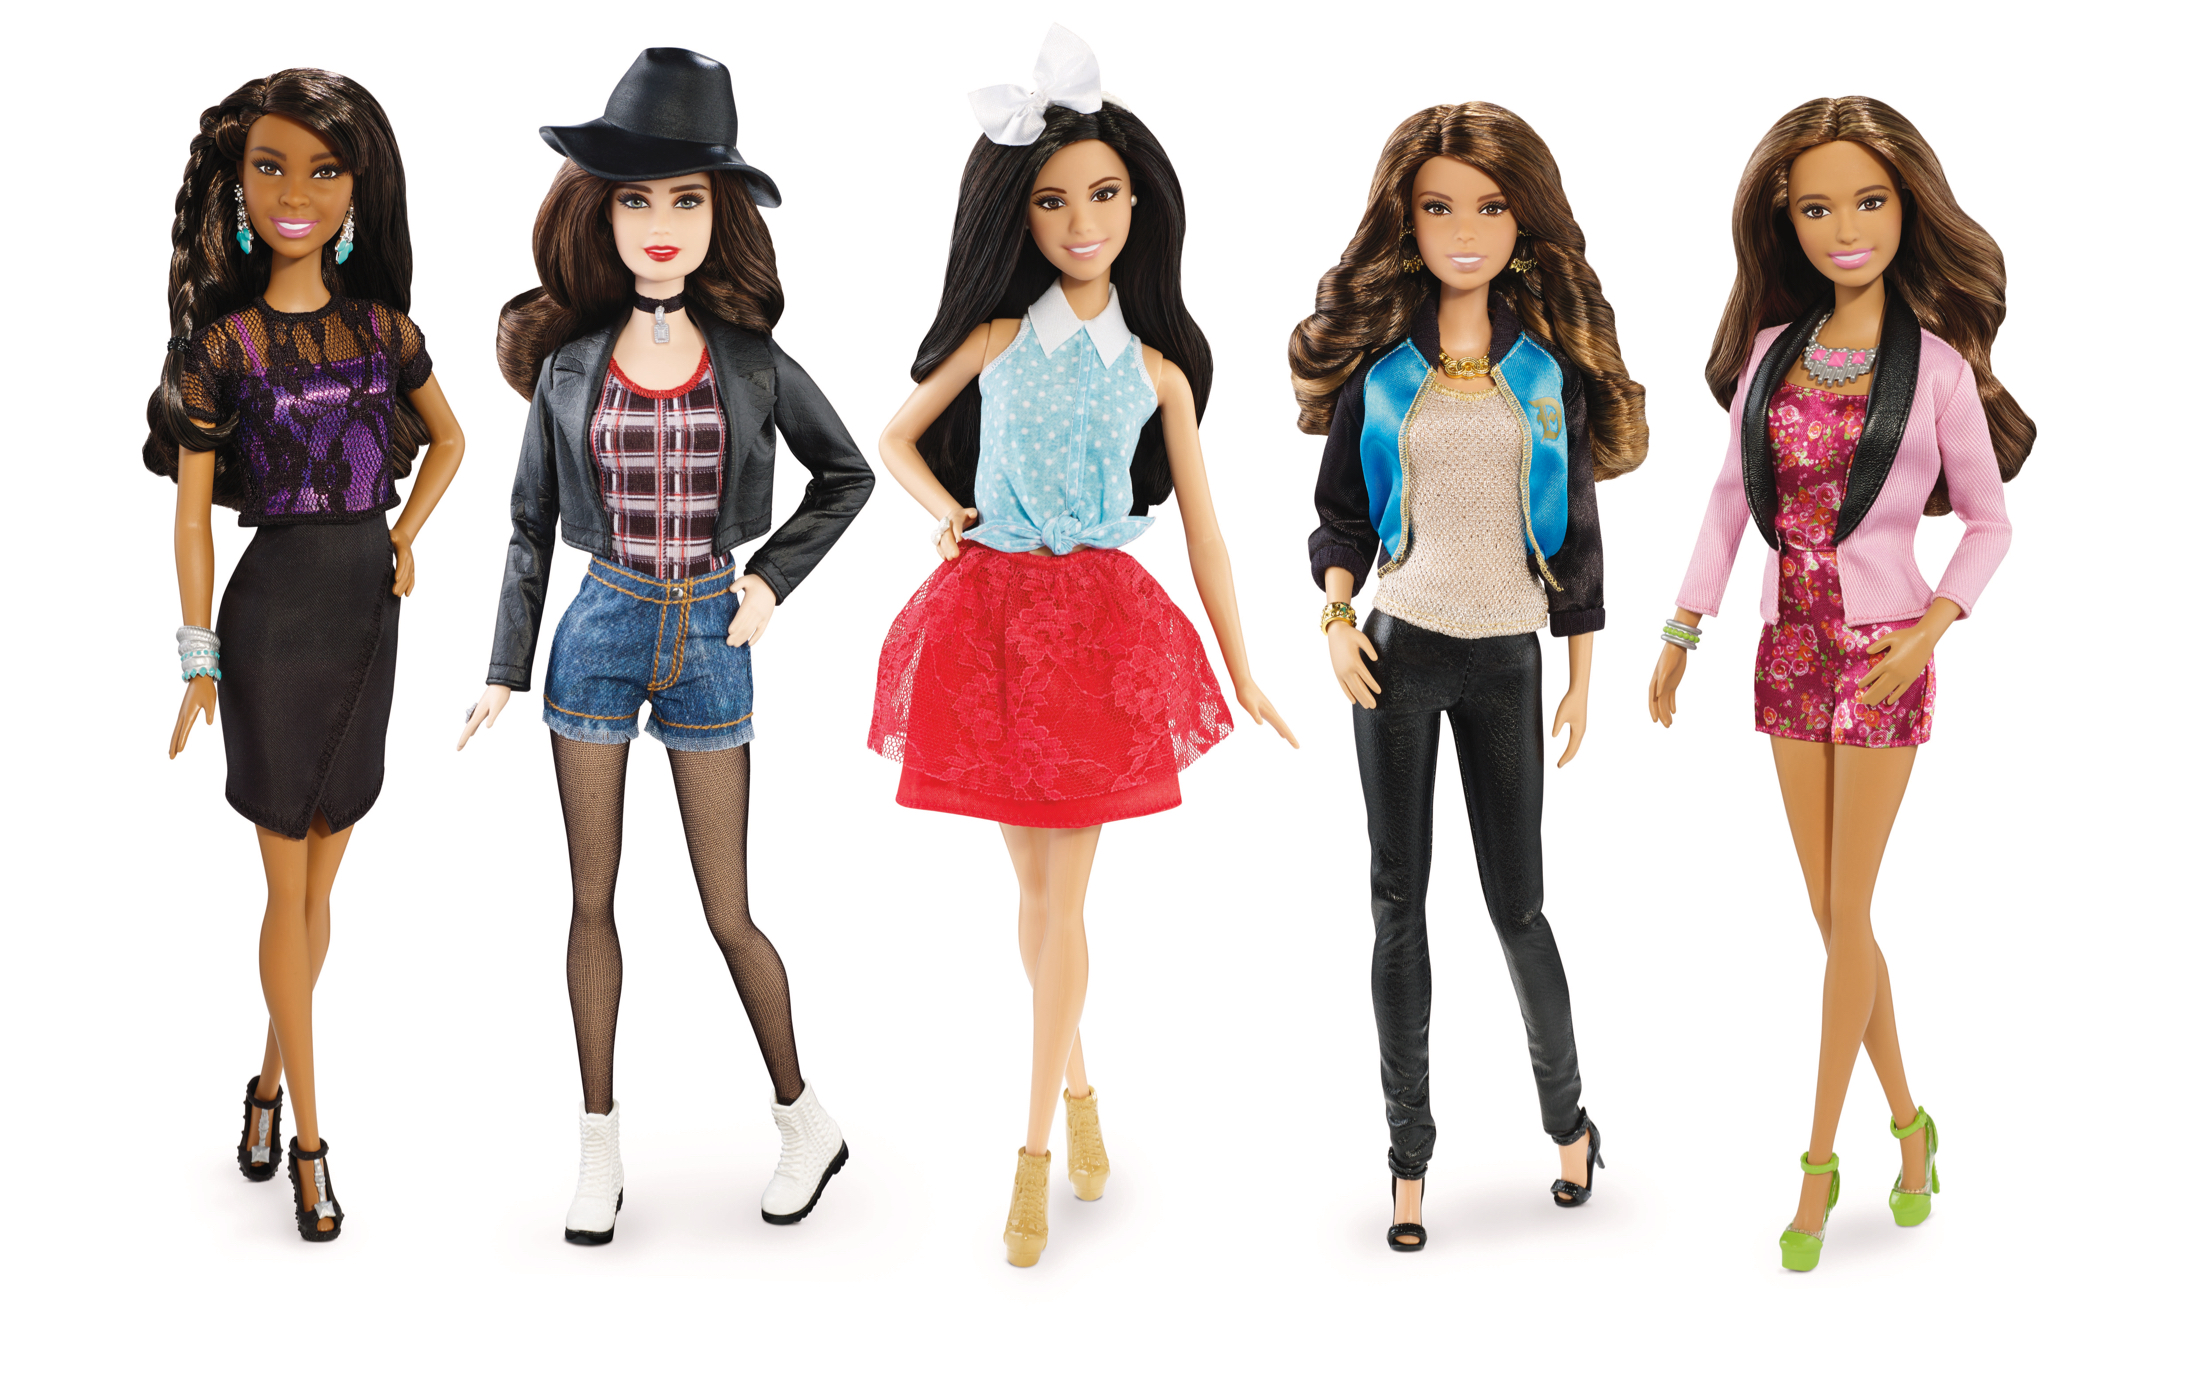 barbie life in the dreamhouse 5th harmony